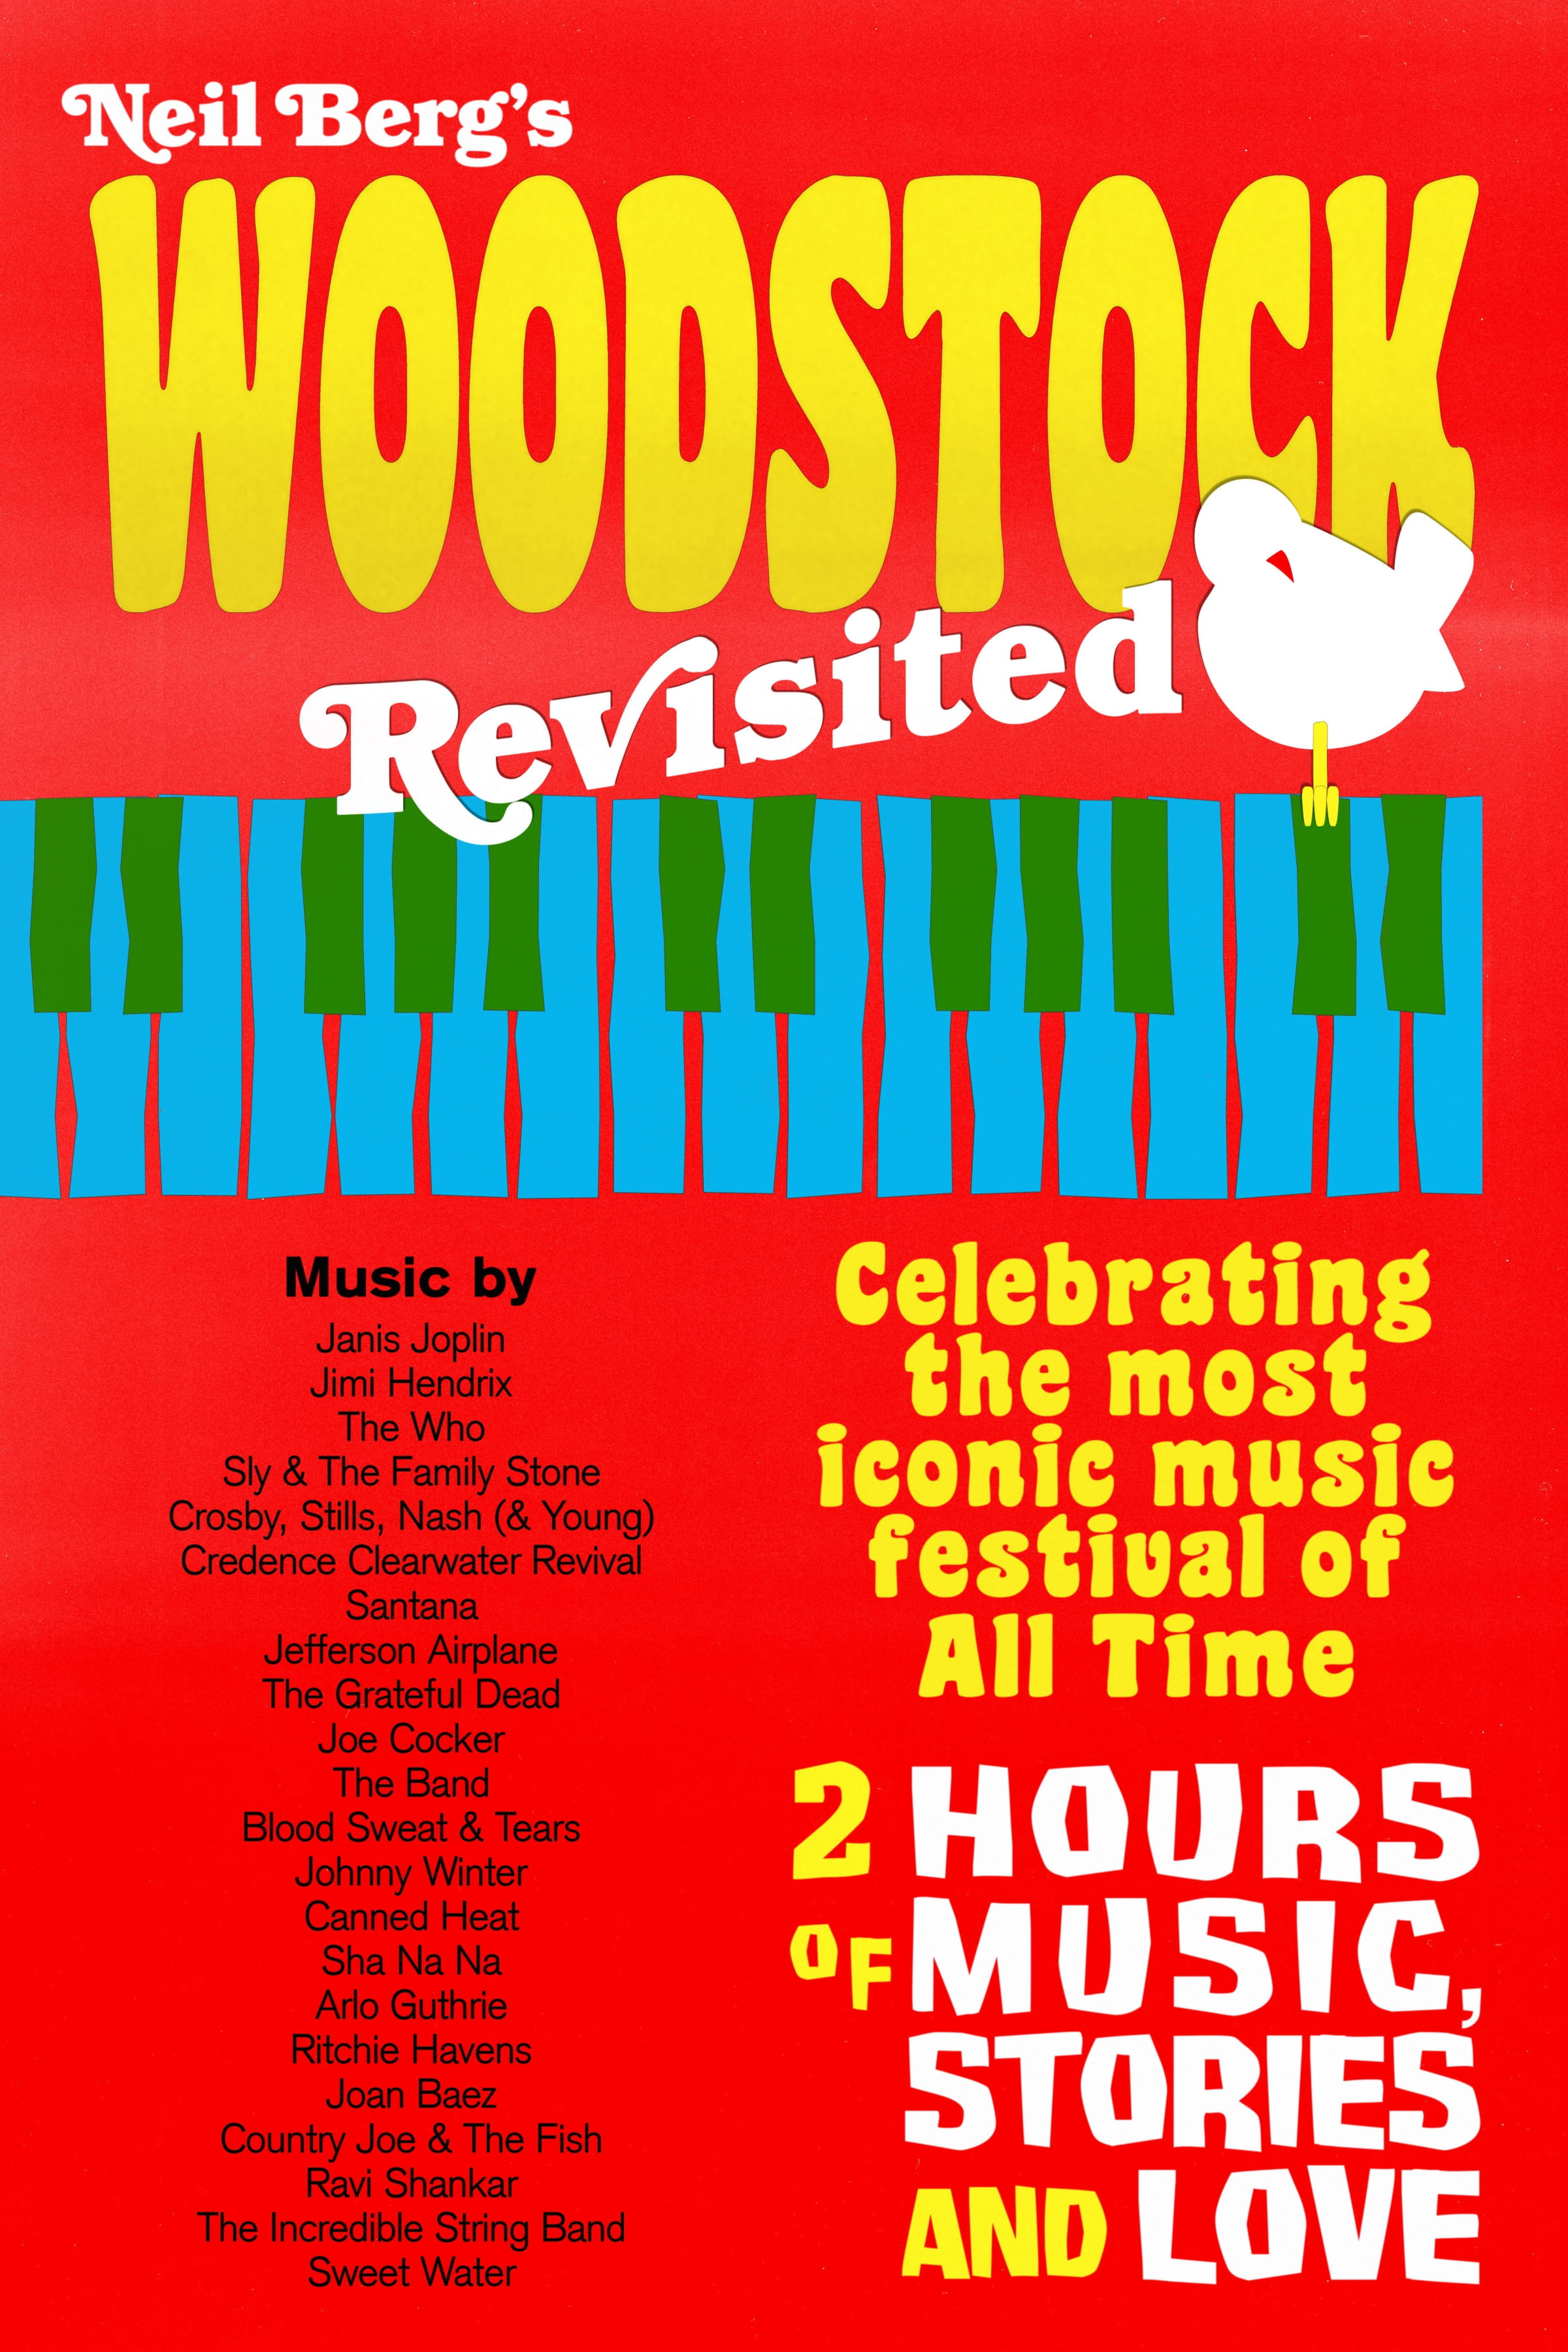 Image of Woodstock Poster